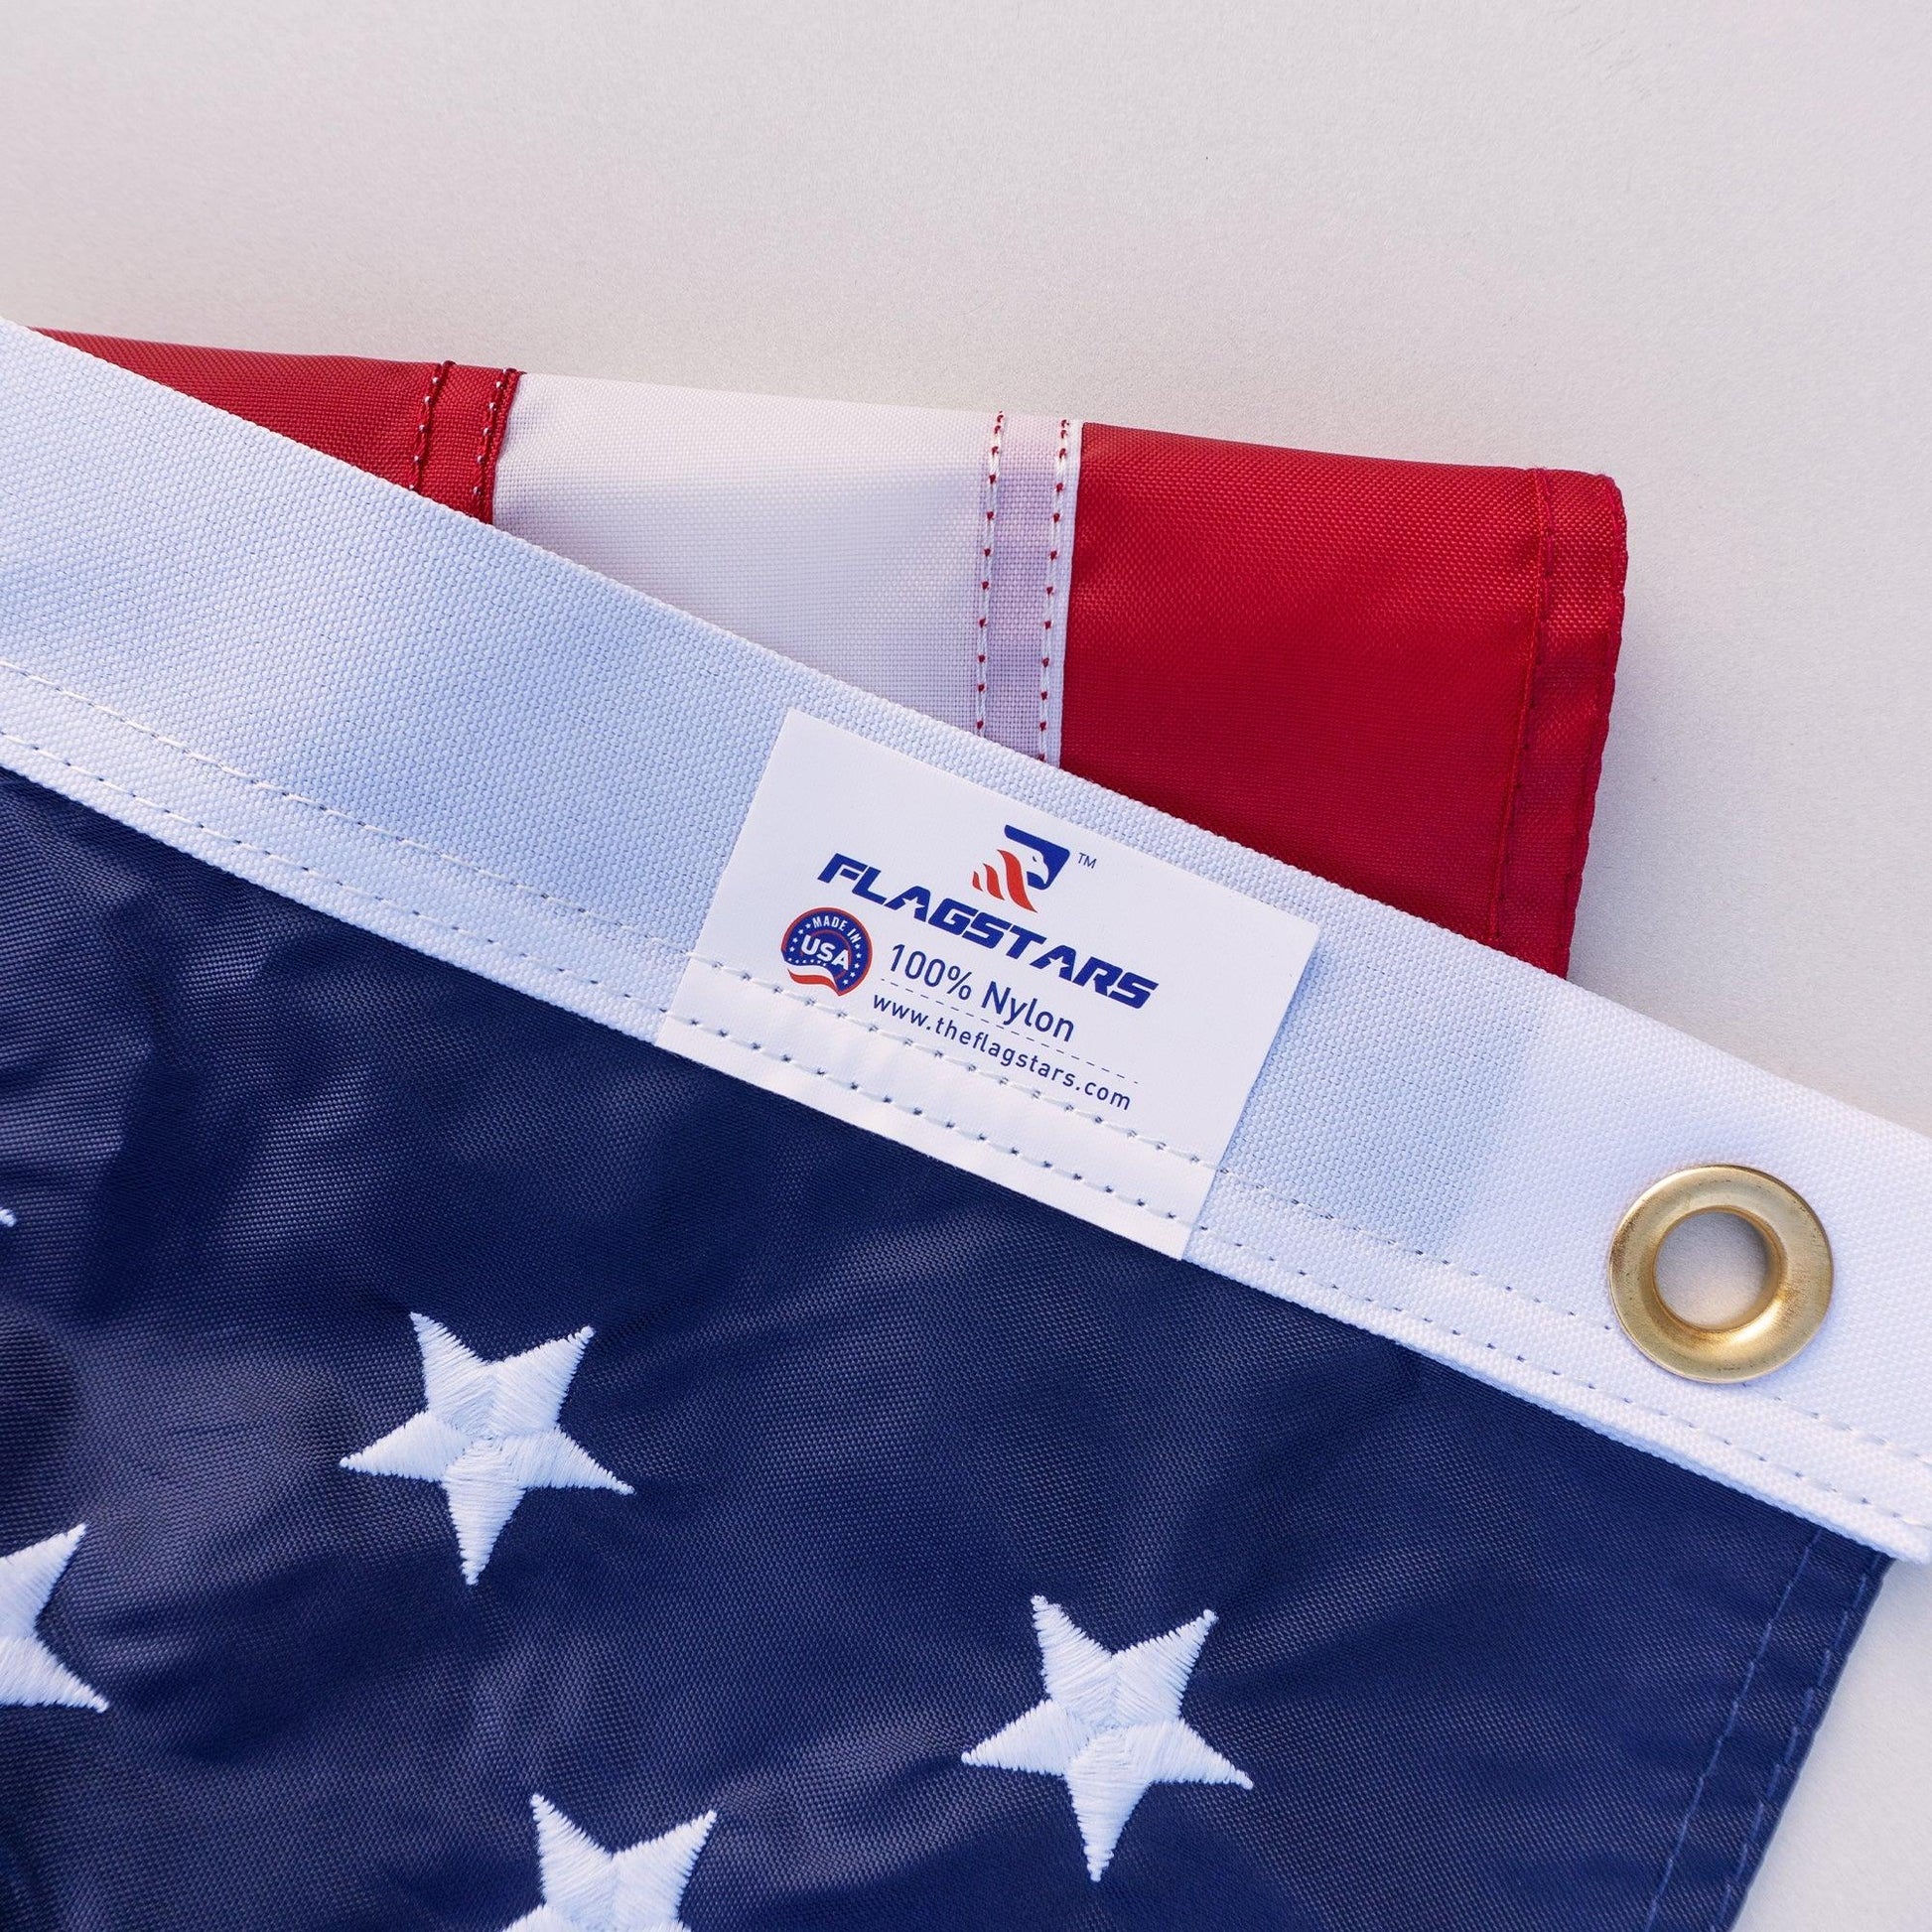 Close-up of the corner of a long-lasting 2.5' X 4' AMERICAN FLAG made by The FlagStars, showing the label, eyelet, and parts of the stars and stripes—proudly made in the USA.